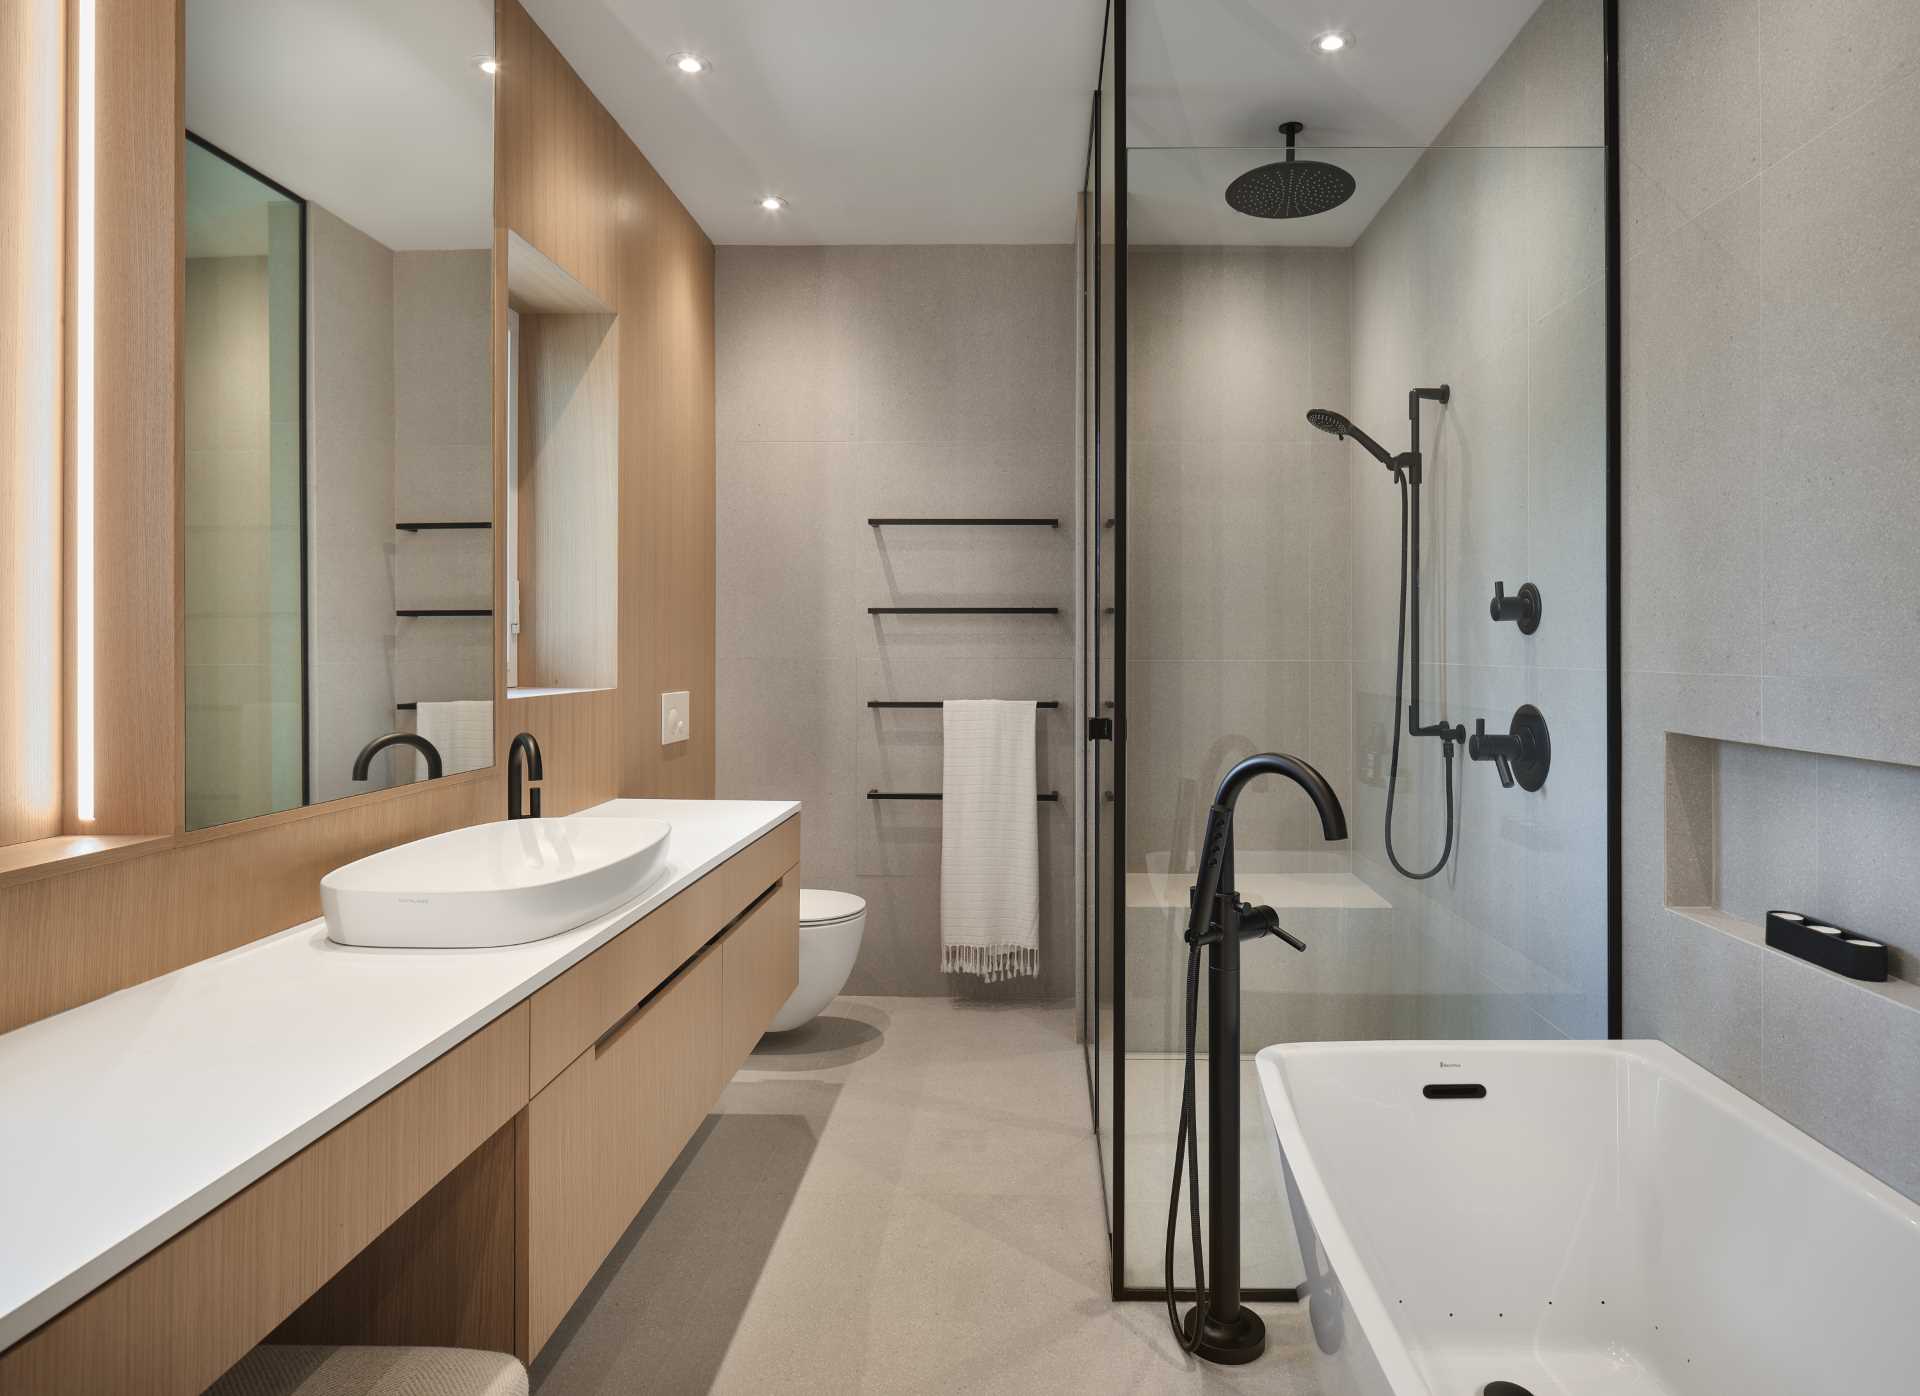 In this modern ensuite bathroom, there's a large vanity, a freestanding bathtub with nearby shelving niche, and a black-framed glass-enclosed shower.